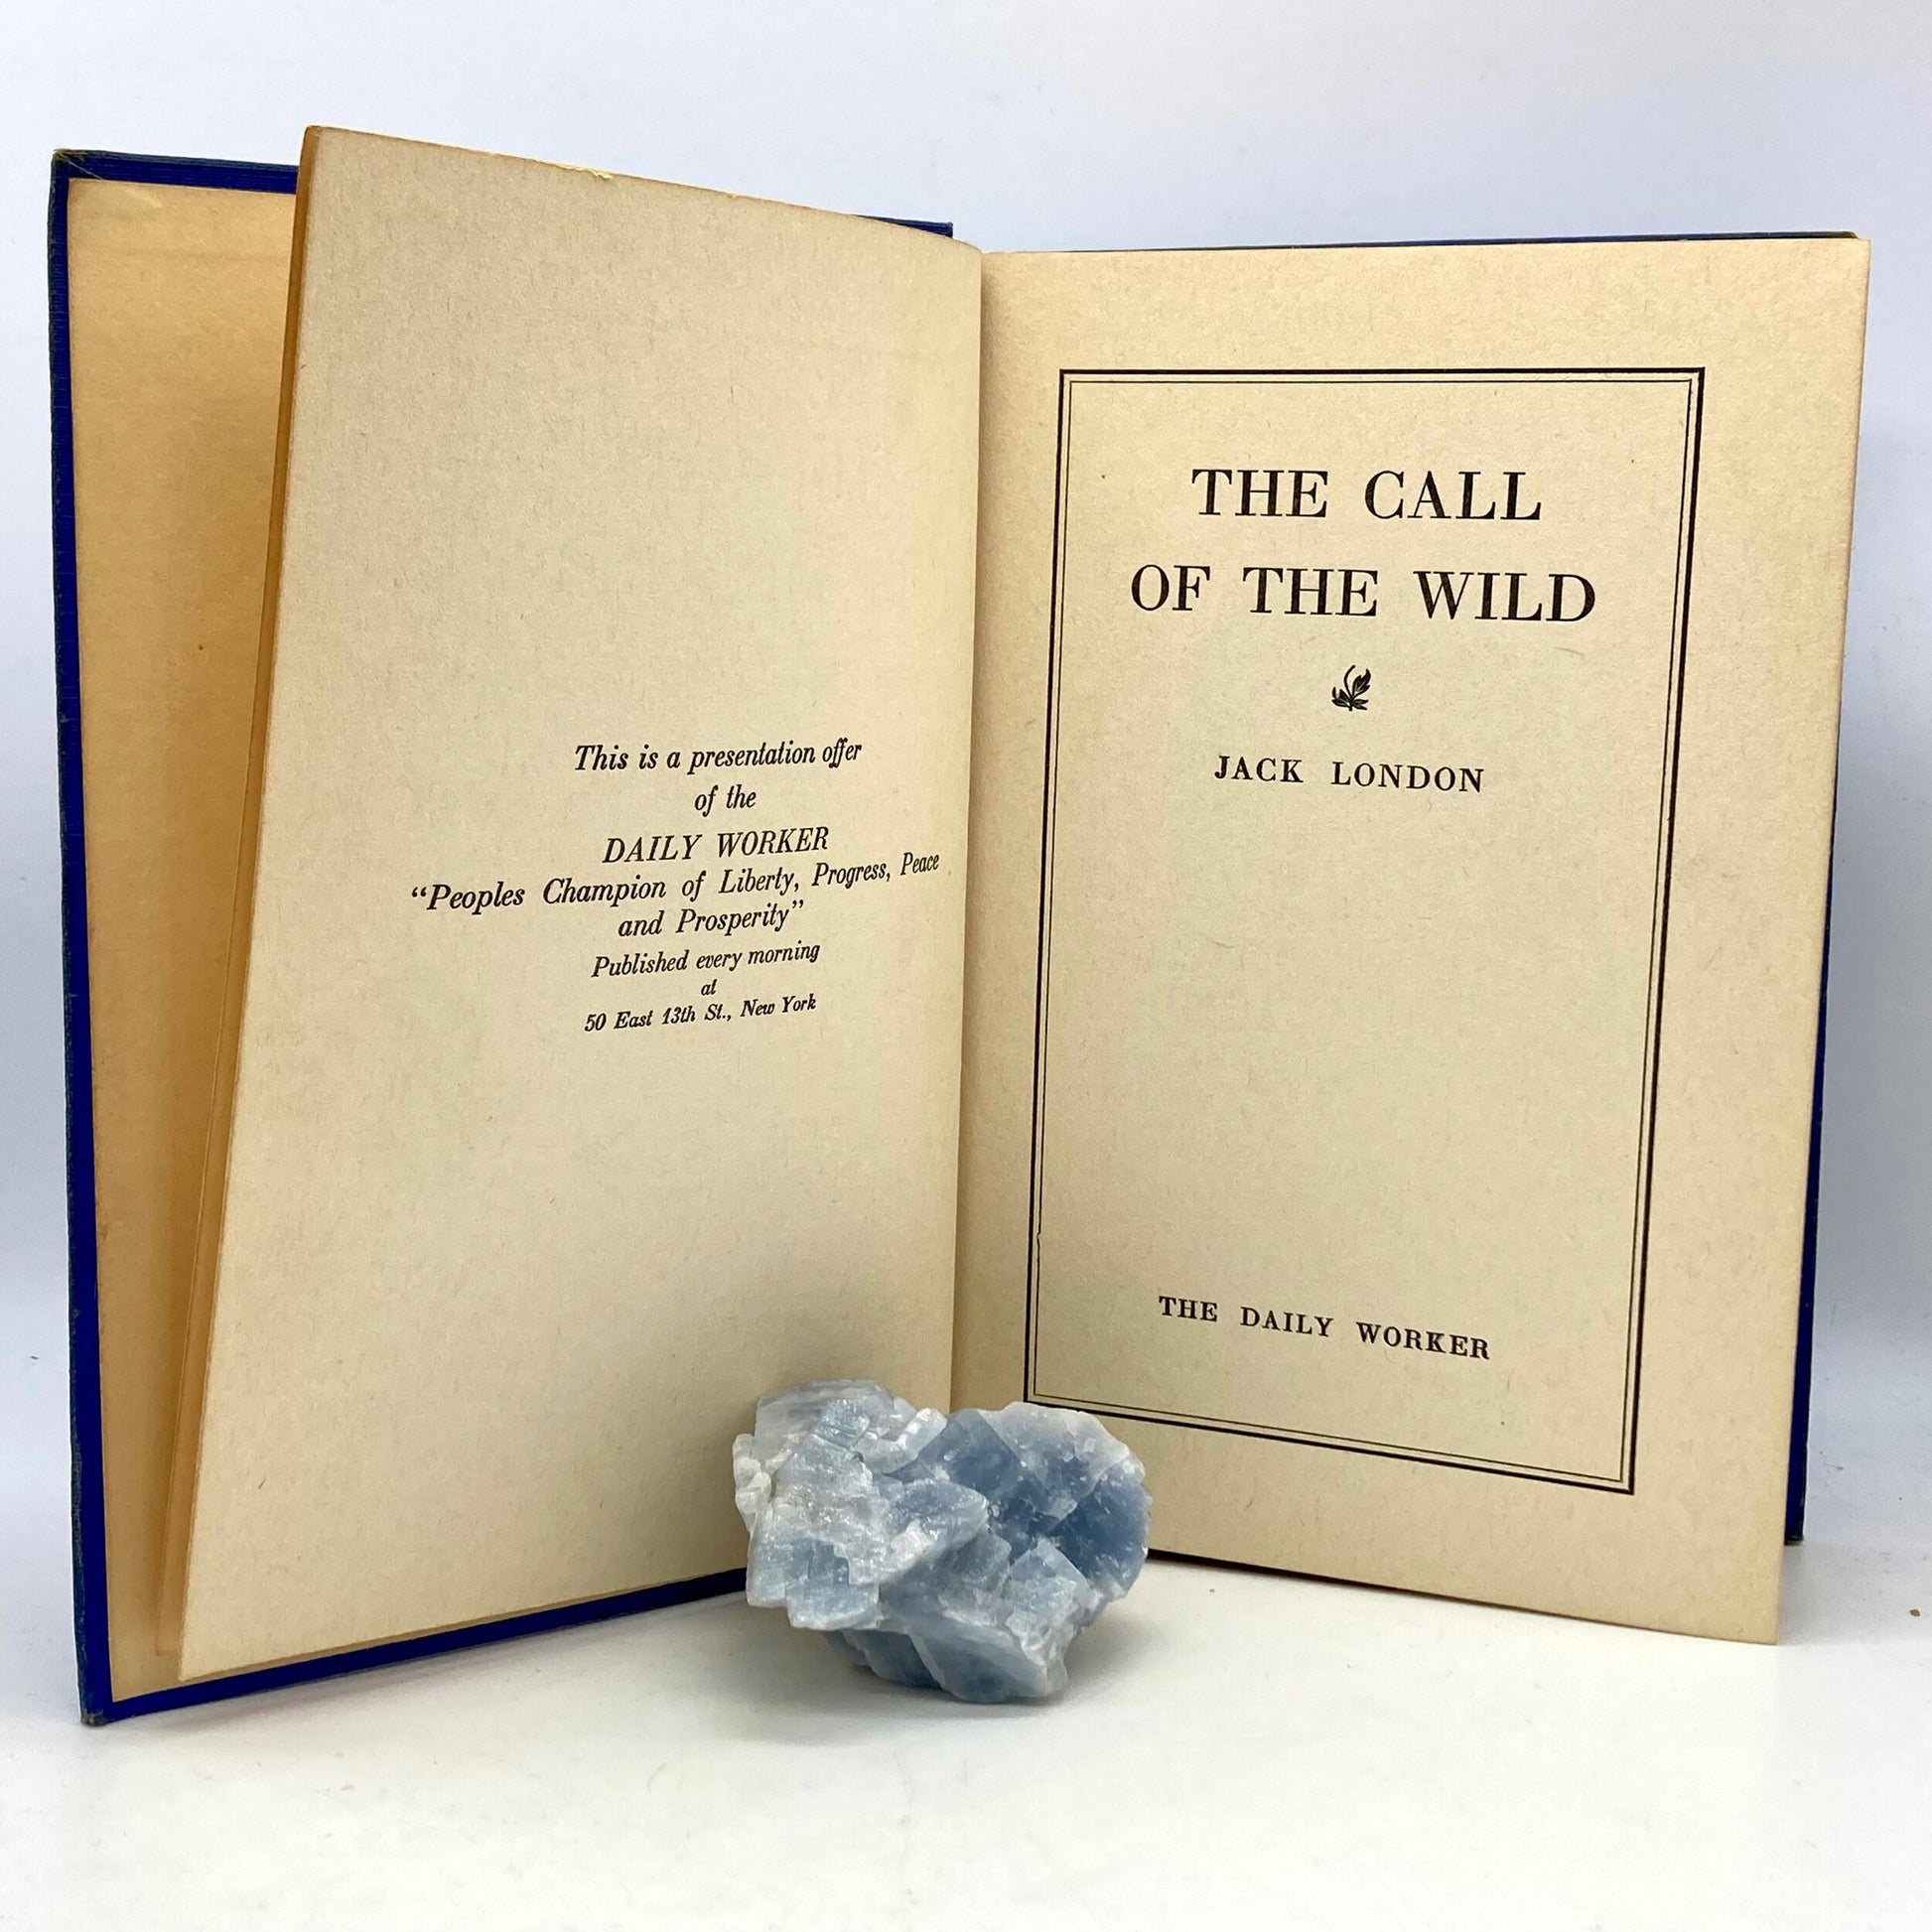 LONDON, Jack “The Call of the Wild” [The Daily Worker, c1930s] - Buzz Bookstore